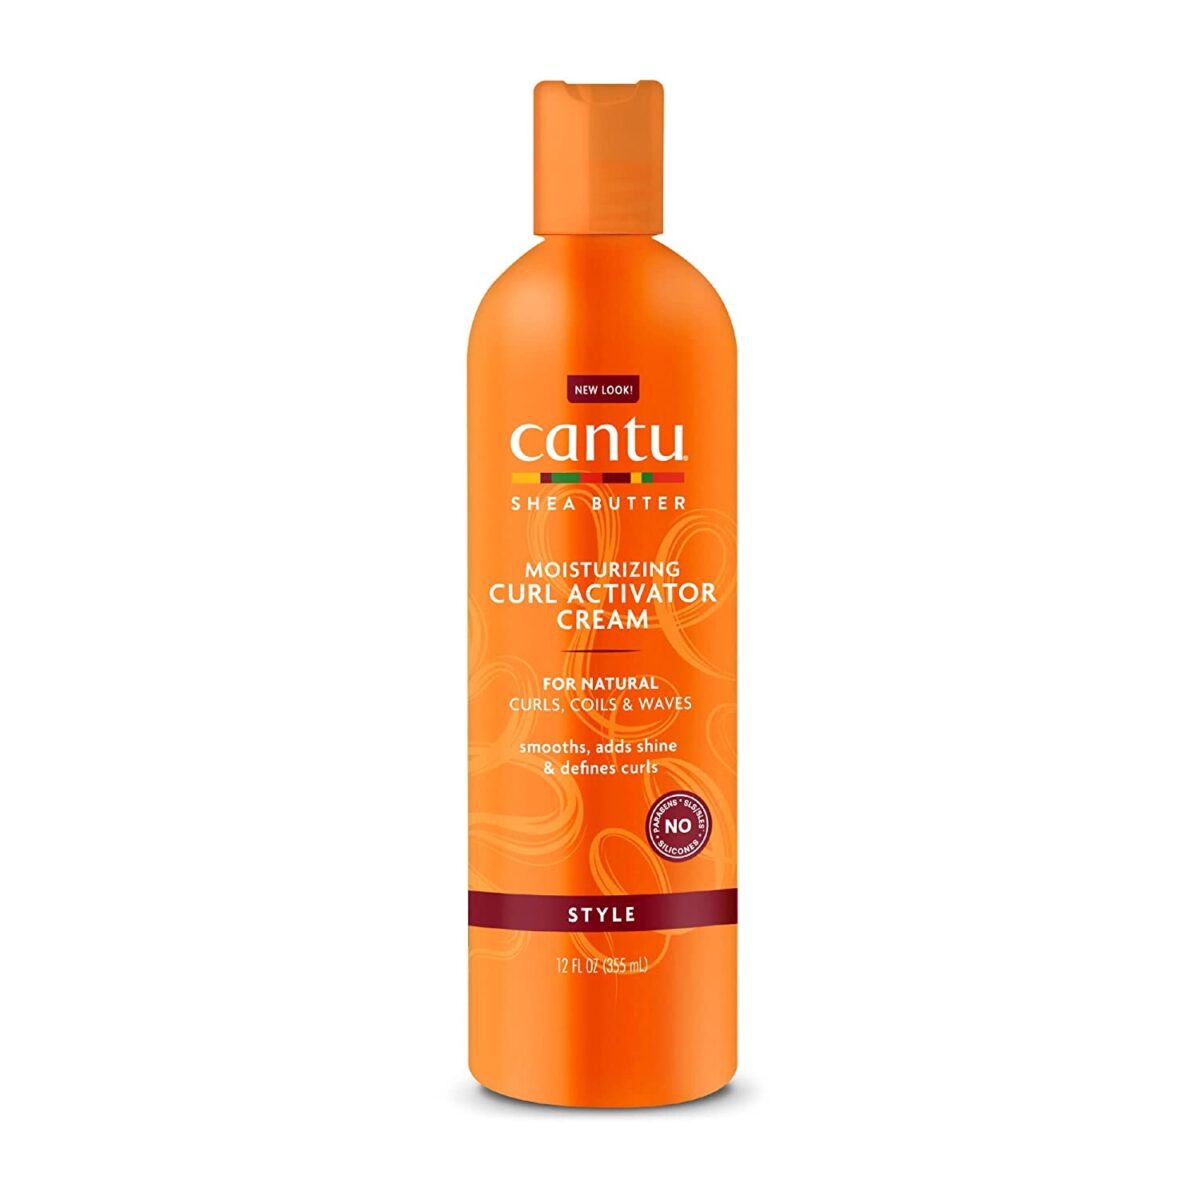 Ohmykajo curly hair care, hair loss treatment, curly hair products Cantu - Shea Butter Moisturizing curl activator cream